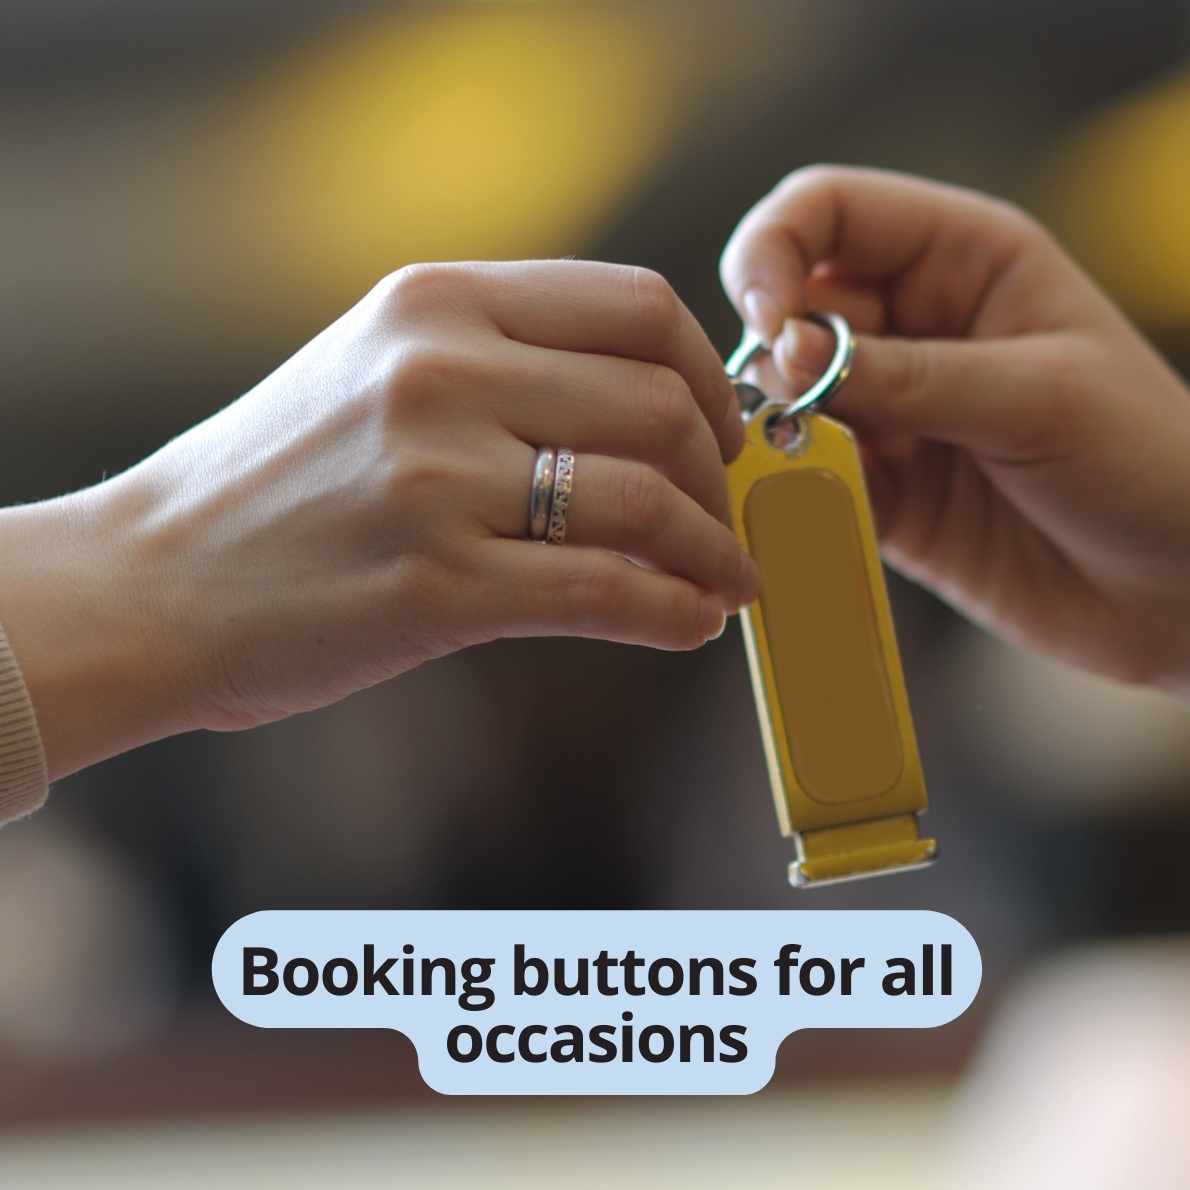 Booking buttons for all occasions